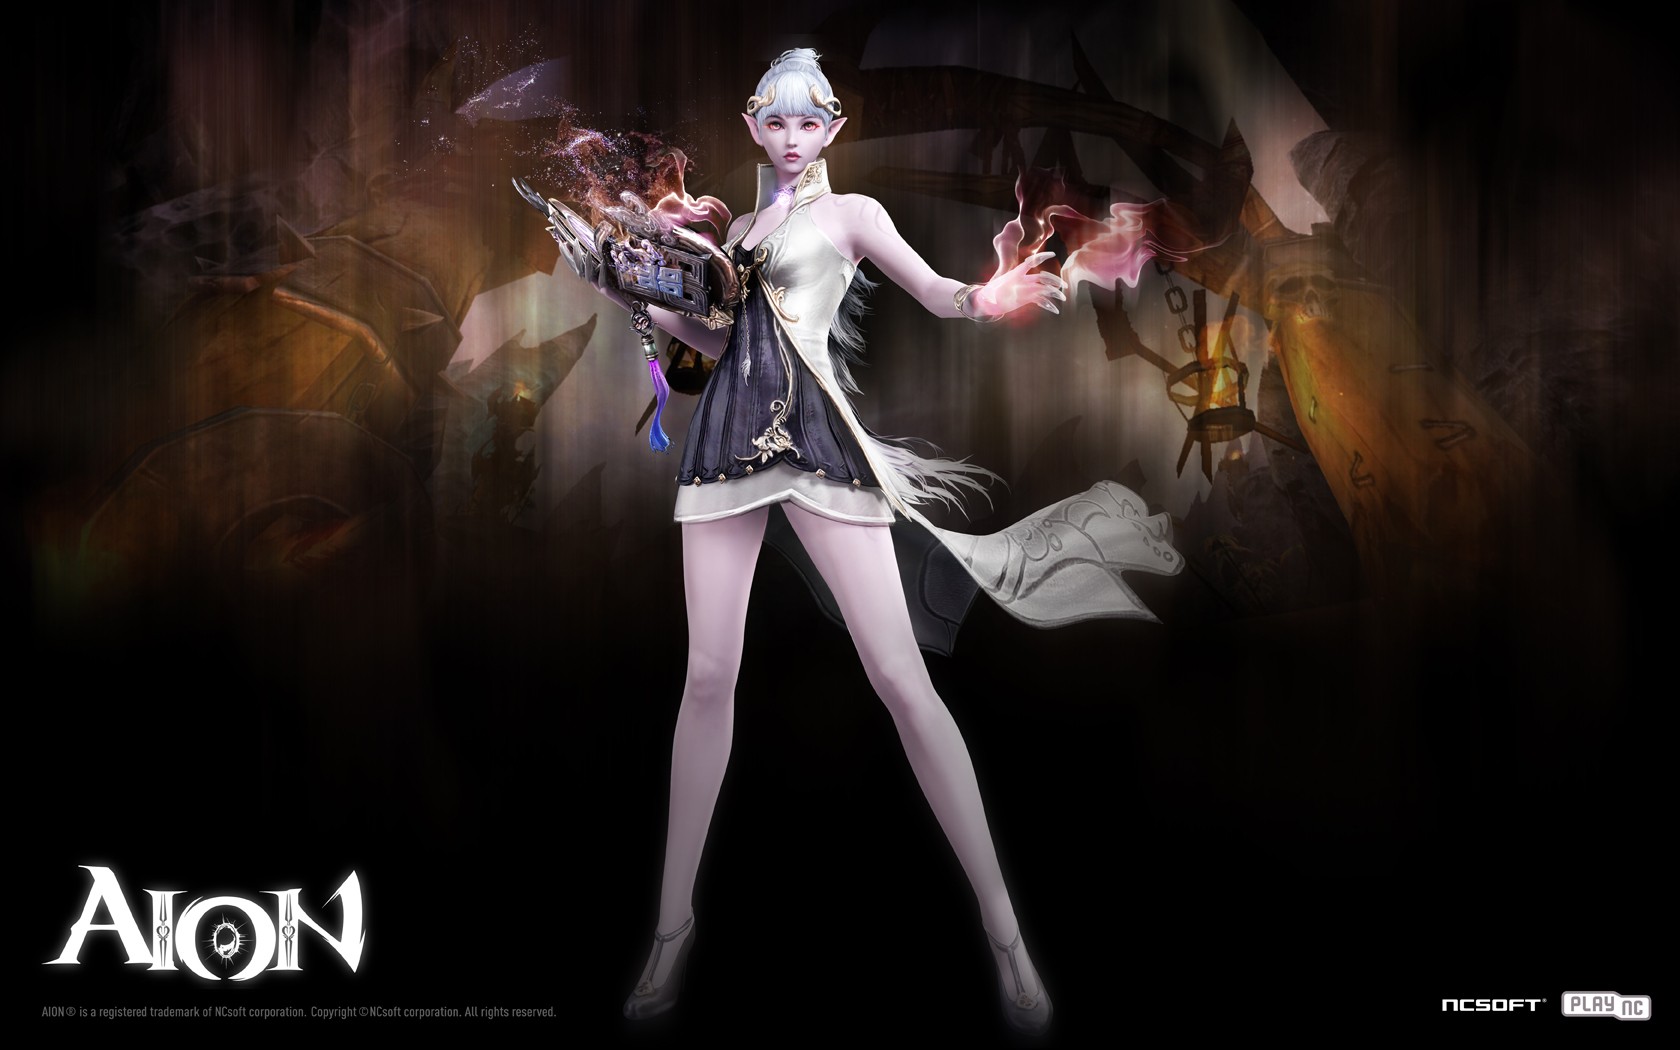 General 1680x1050 Aion classes video games fantasy girl PC gaming video game girls legs NCSOFT